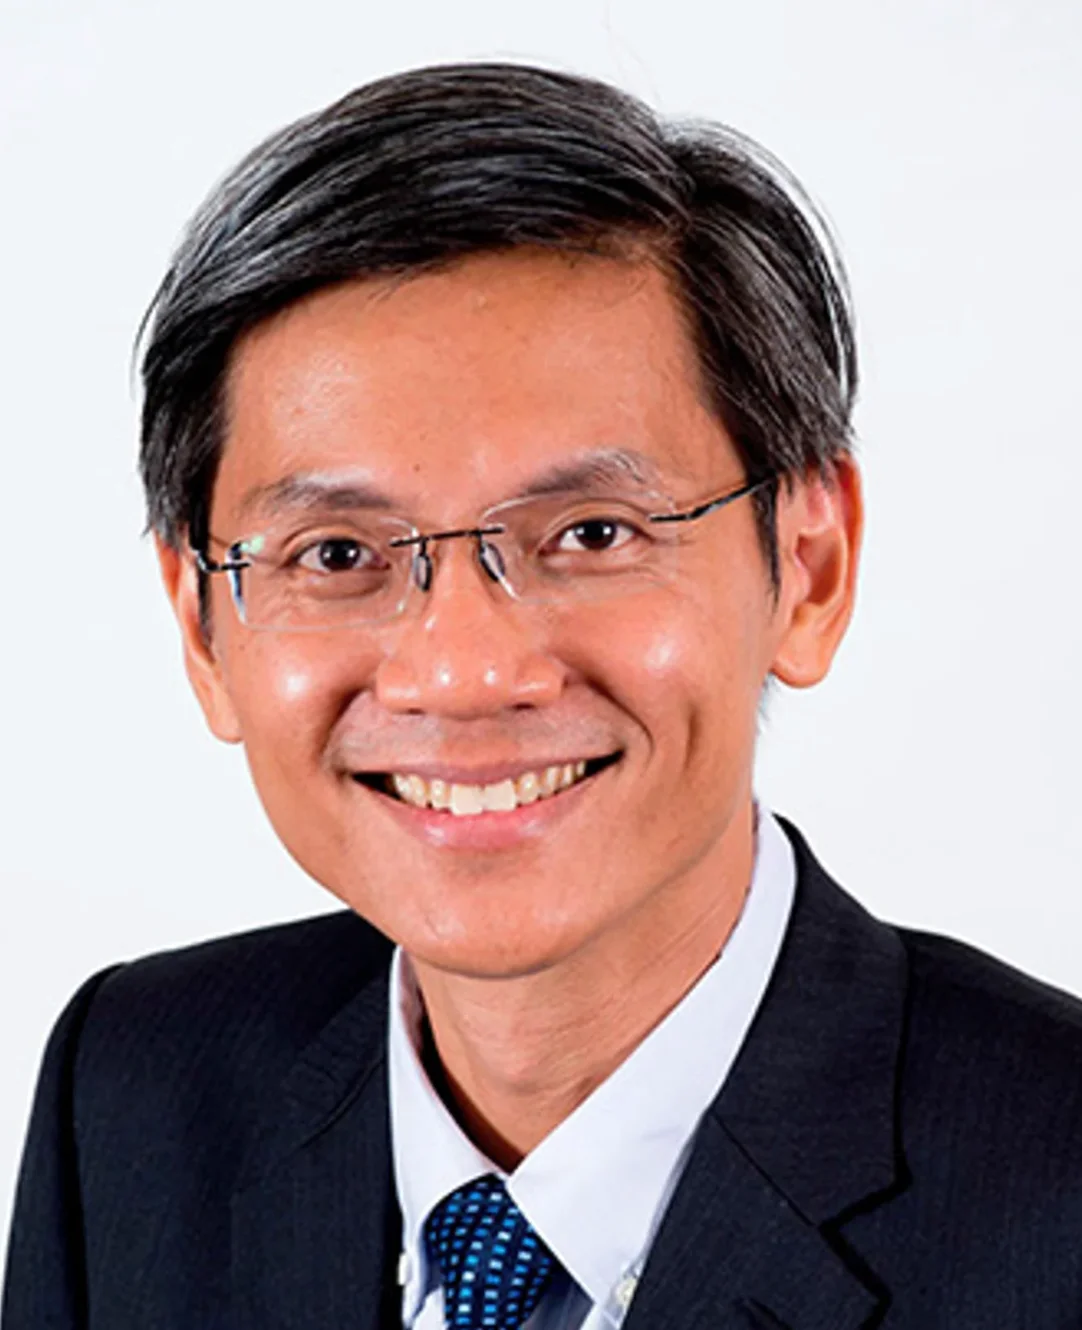 Dr. Liow Chee Hsiang